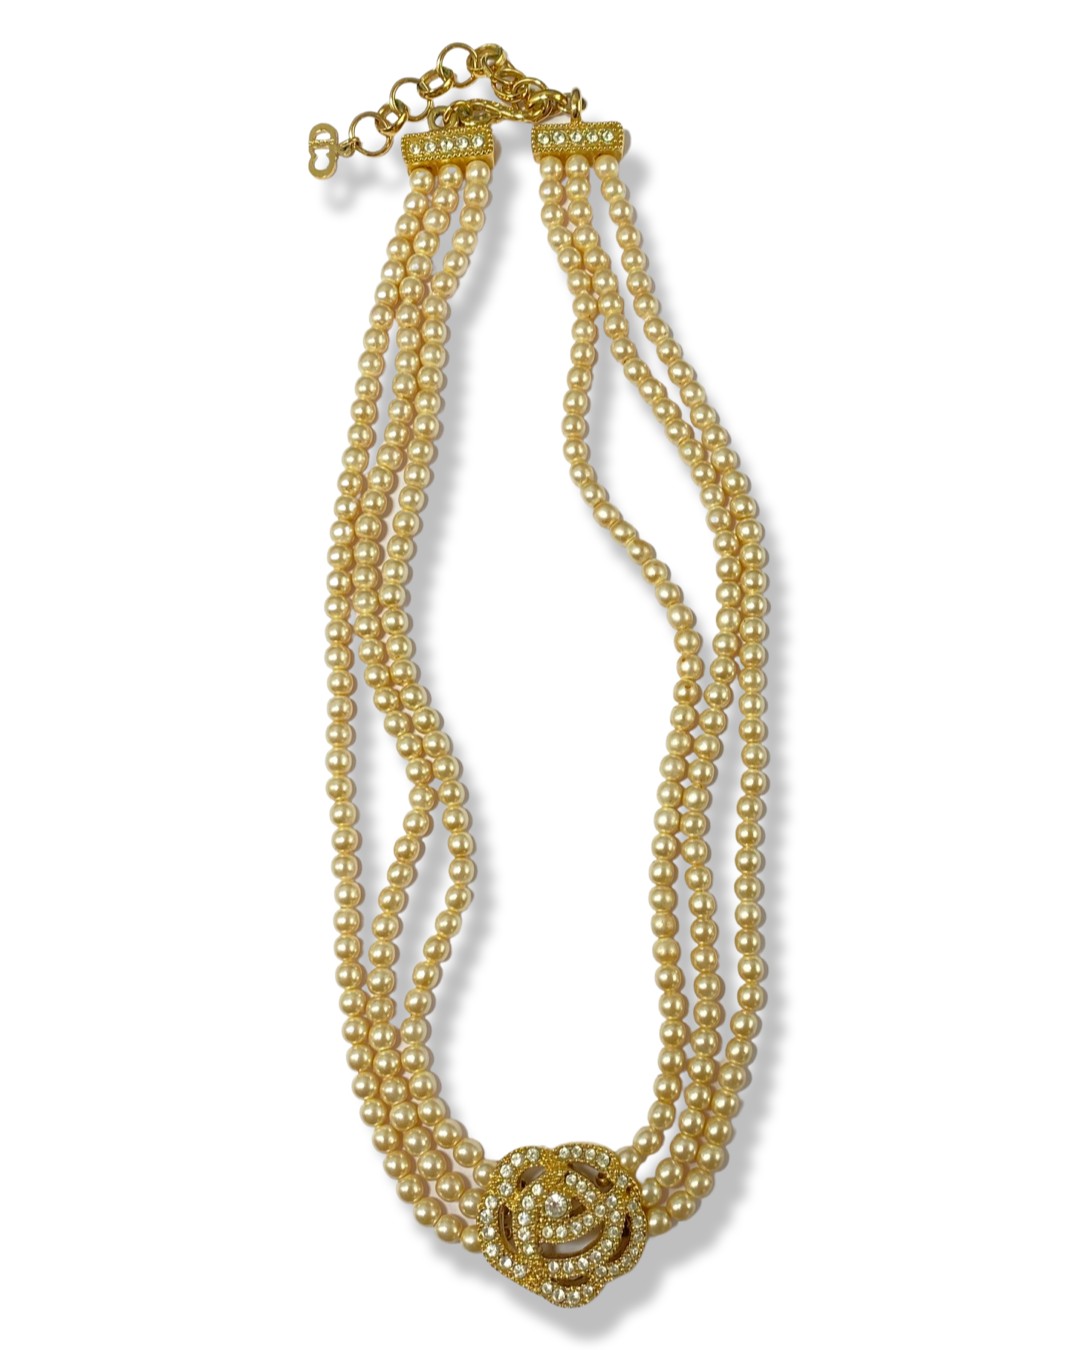 Christian Dior three row pearl necklace with floral centre pendant which is embellished with CZ